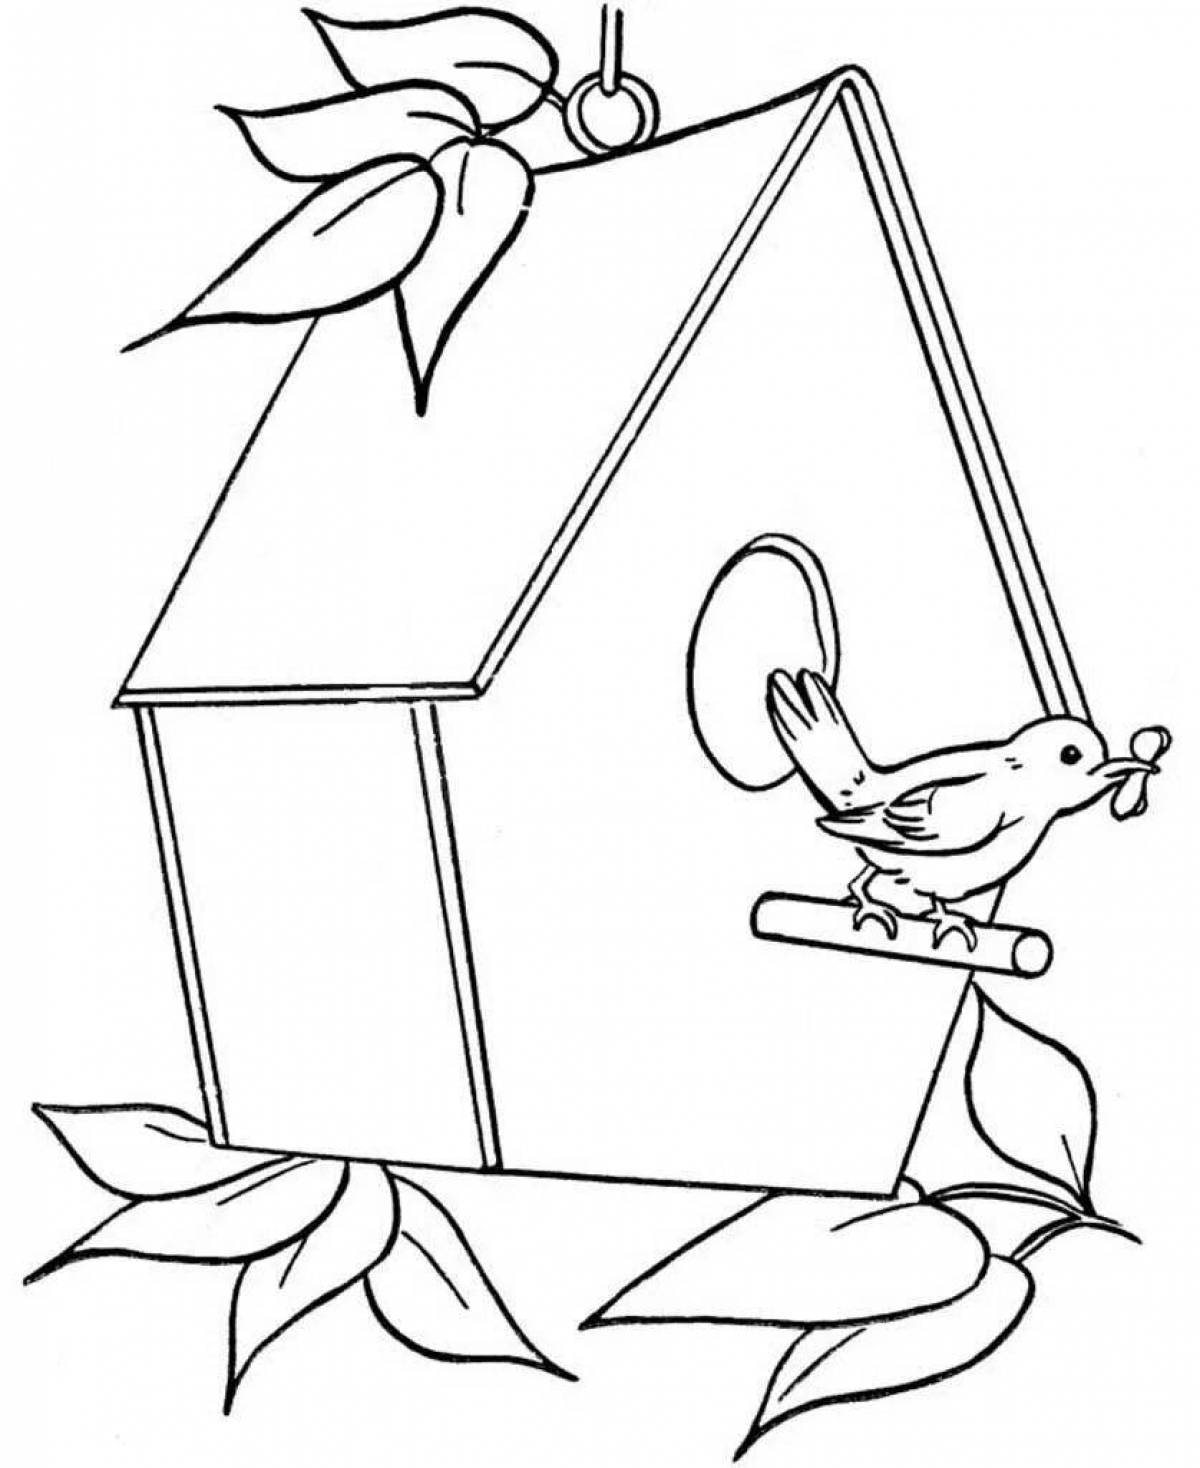 Fun bird feeder coloring book for 4-5 year olds